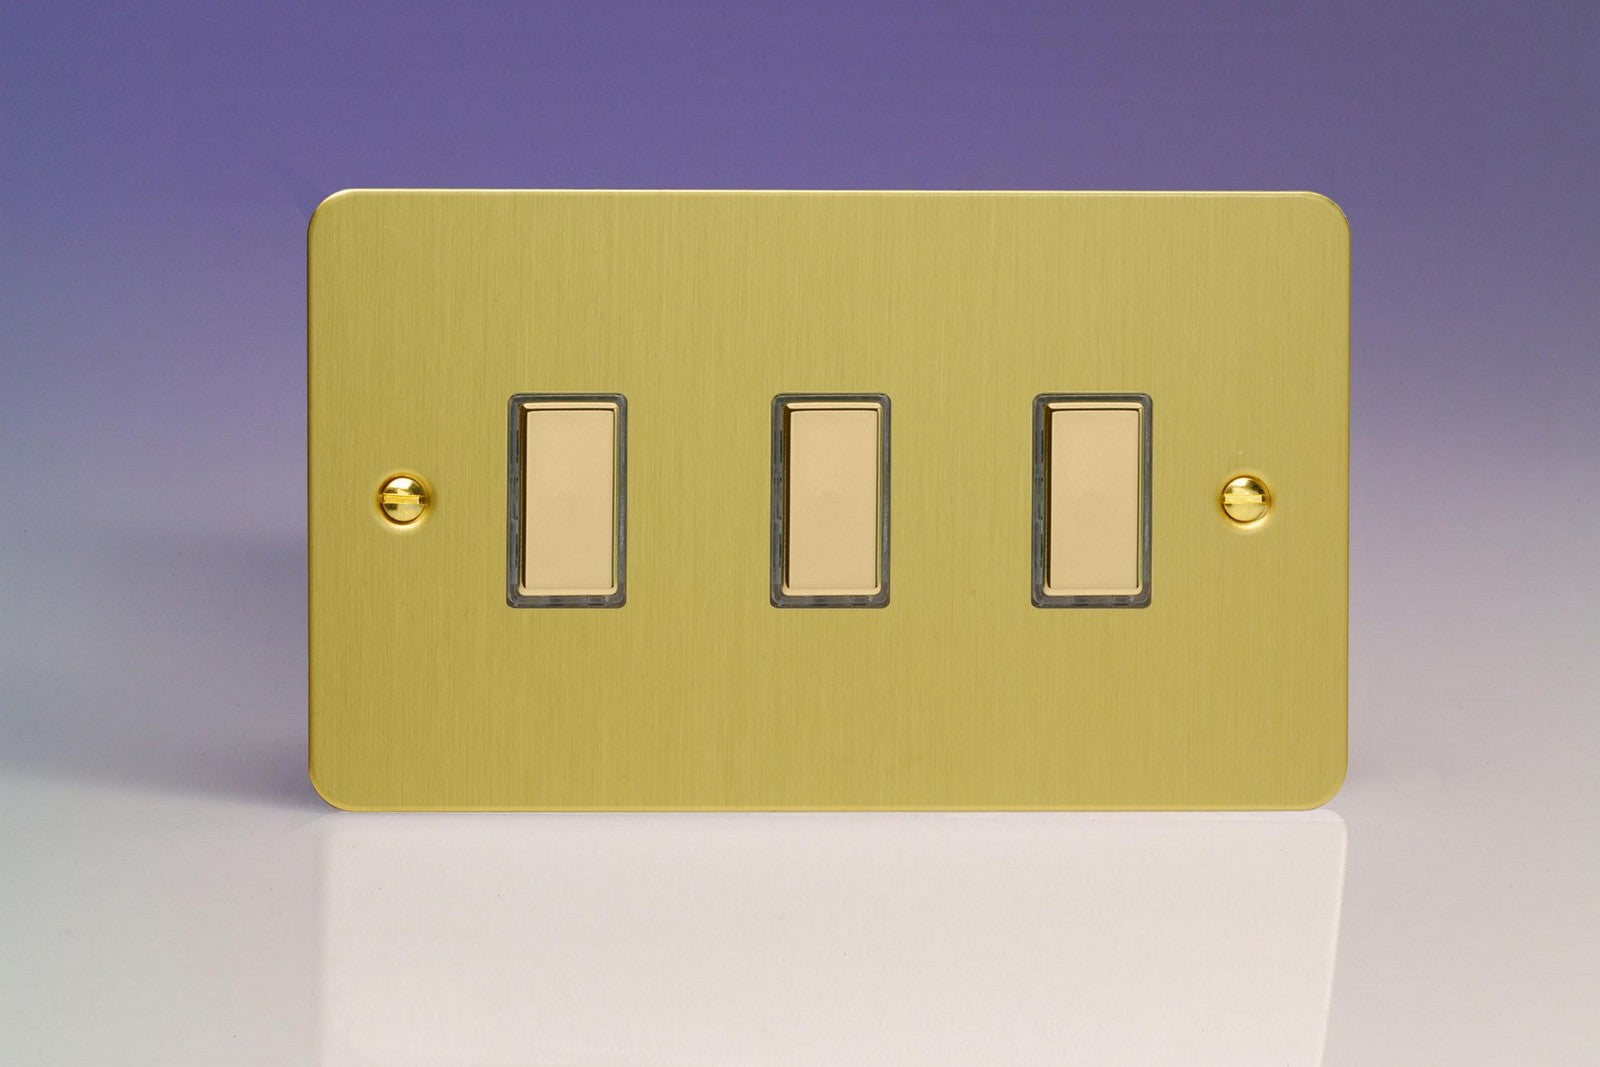 Varilight JFBES003 Ultraflat Brushed Brass 3-Gang Tactile Touch Control Dimming Slave for use with Multi-Point Touch or Remote Master on 2-Way Circuits (Twin Plate)